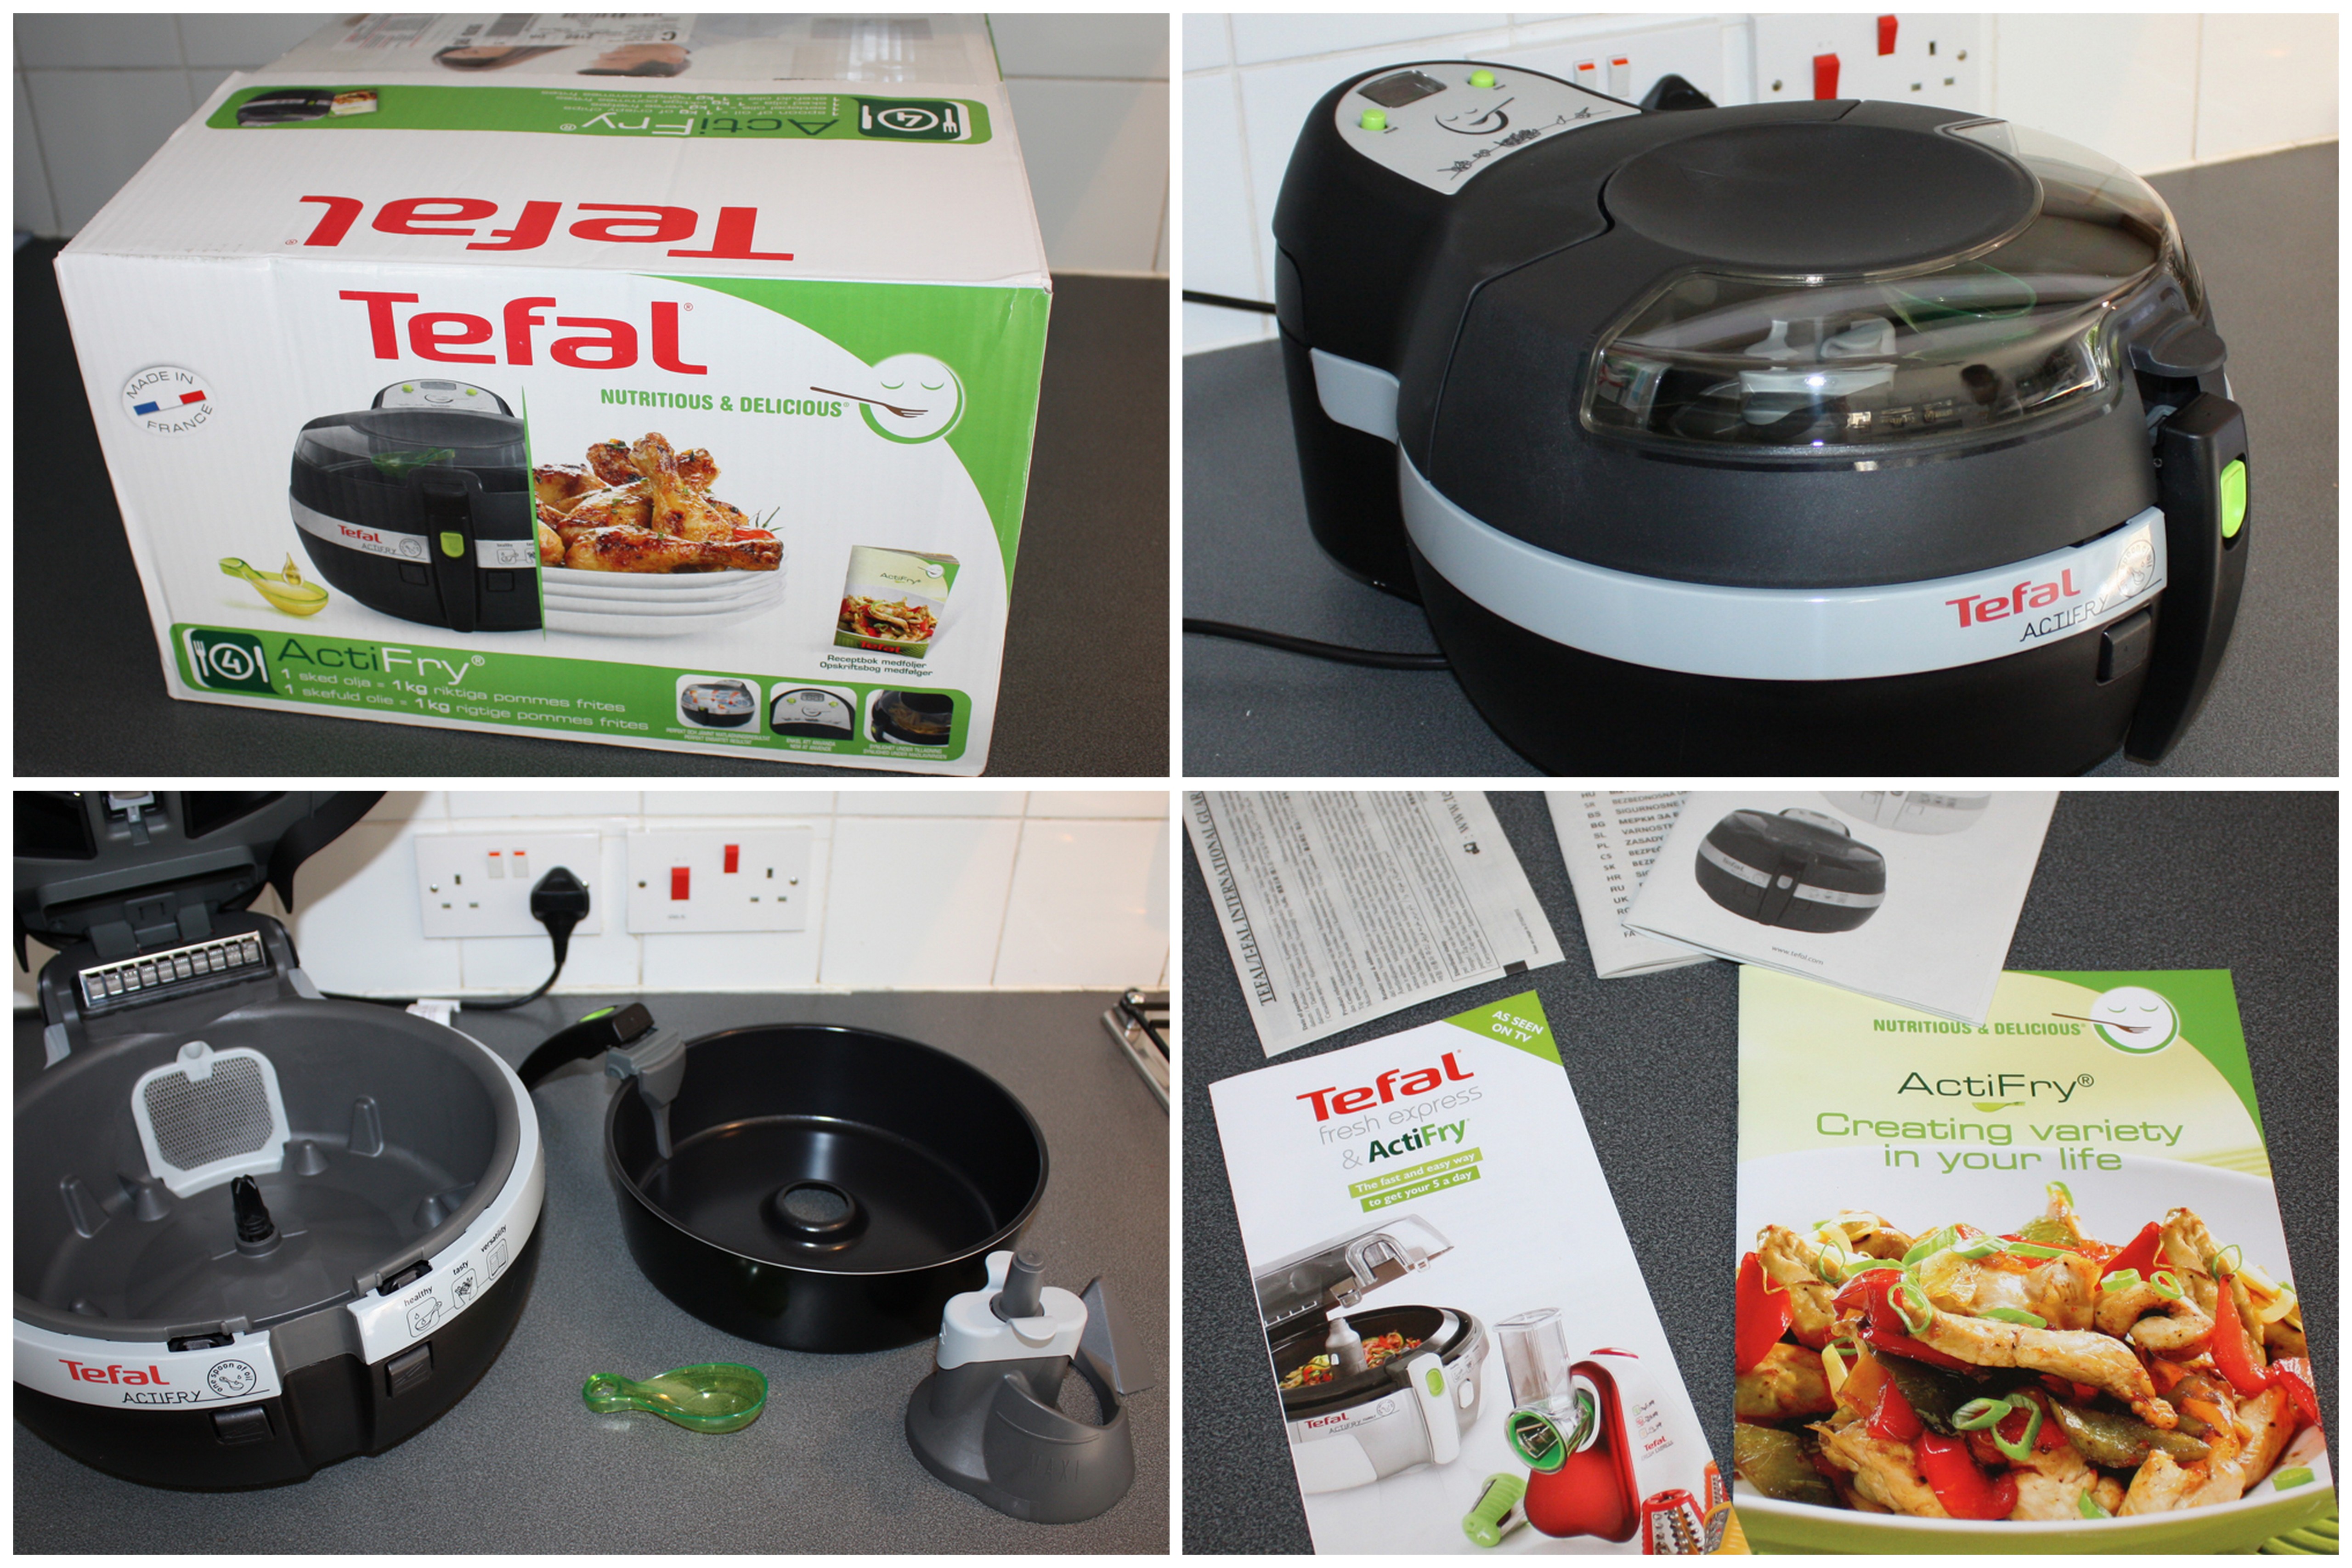 Tefal Actifry Review - Review Bunny Bunny